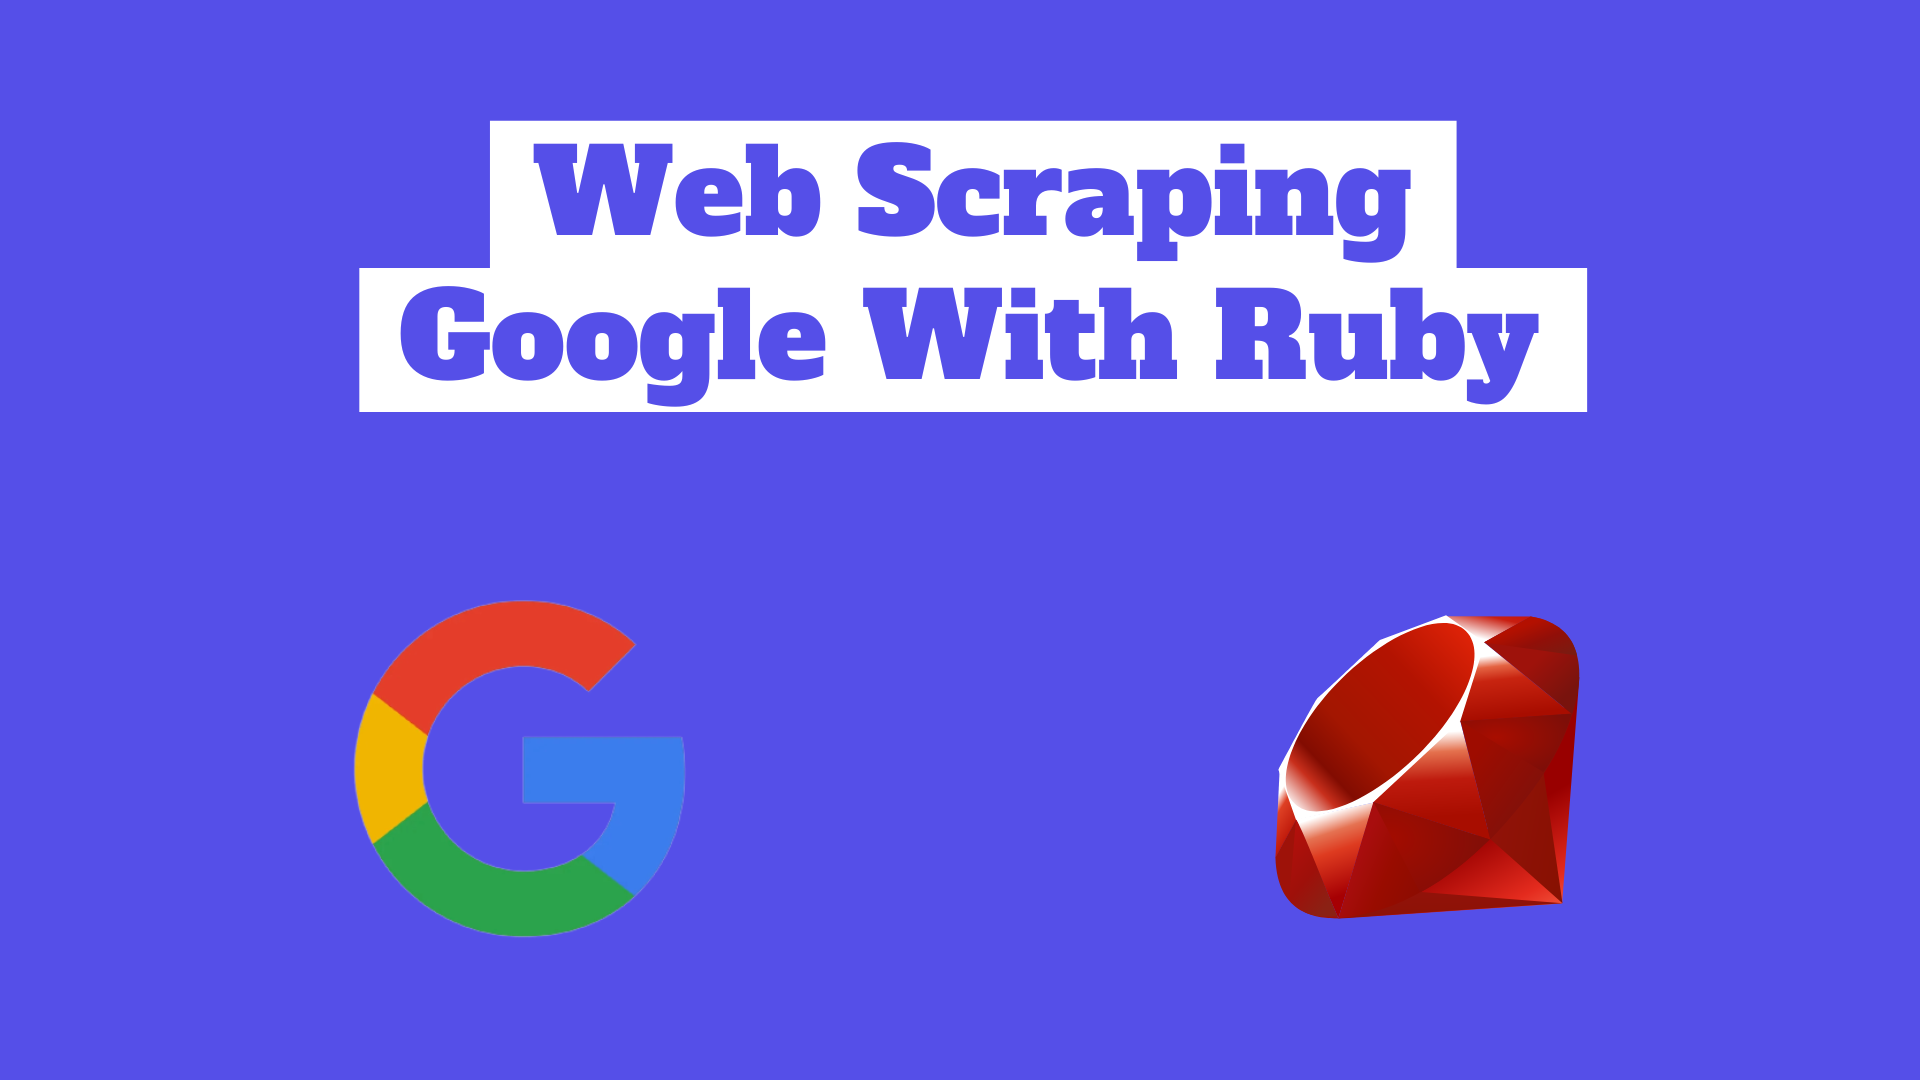 Scraping Google Search Results With Ruby